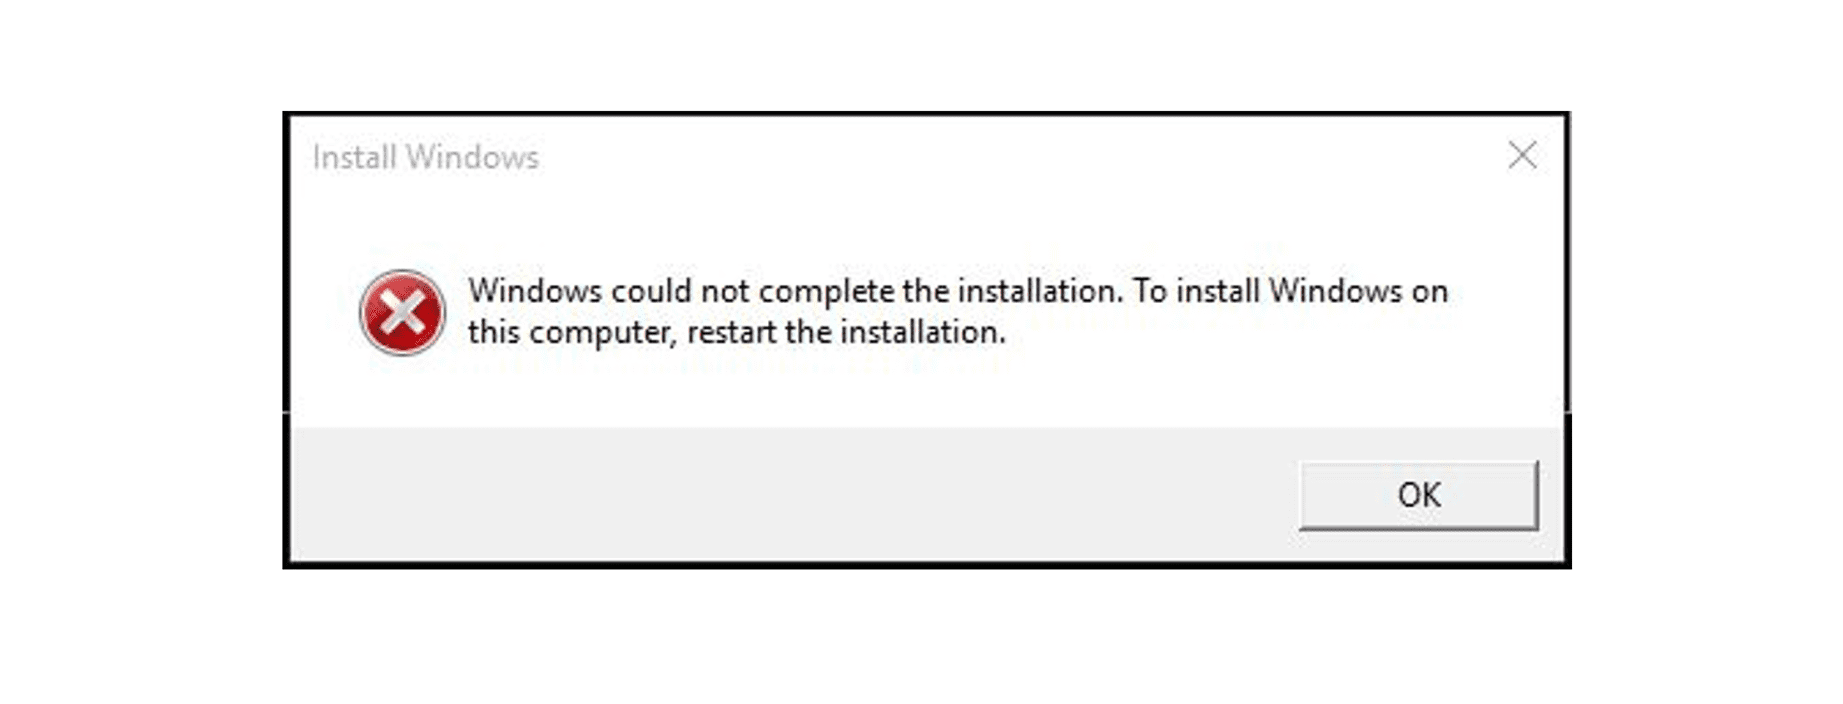 Windows-could-not-complete-installation_error.png